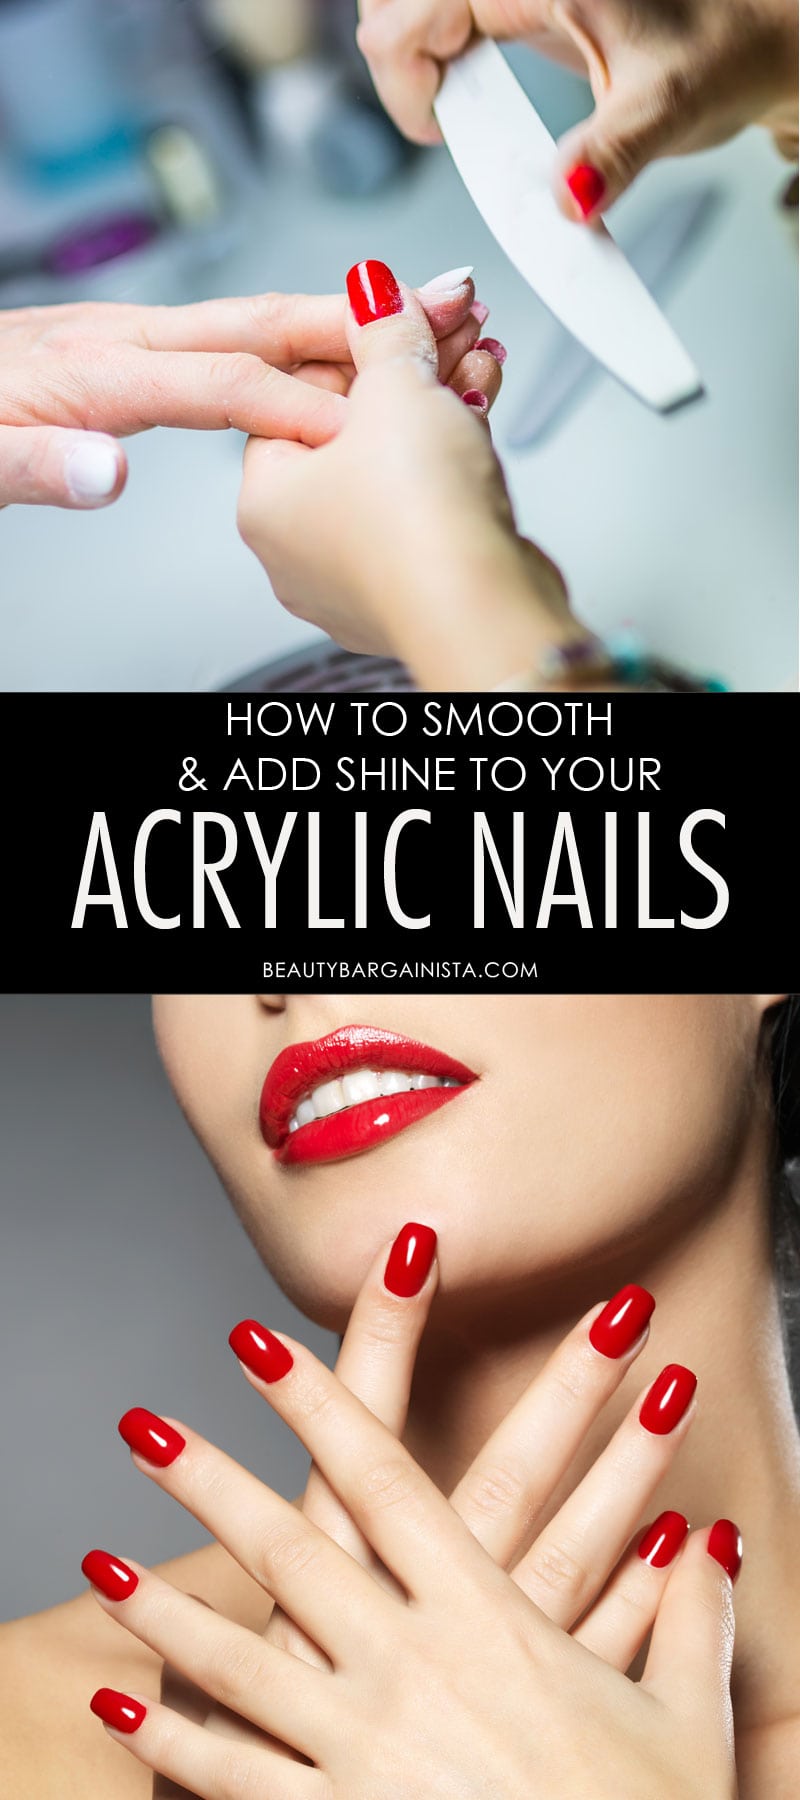 Who doesn't want shiny and smooth acrylic nails? Because acrylics are molded and shaped to the nail using a liquid acrylic combined with a powdered acrylic product, sometimes these nails can get dull and lackluster in a few days of wear. But I've discovered the secret to glossy and smooth acrylic nails so you can have a chip-free shine for at least two weeks! 